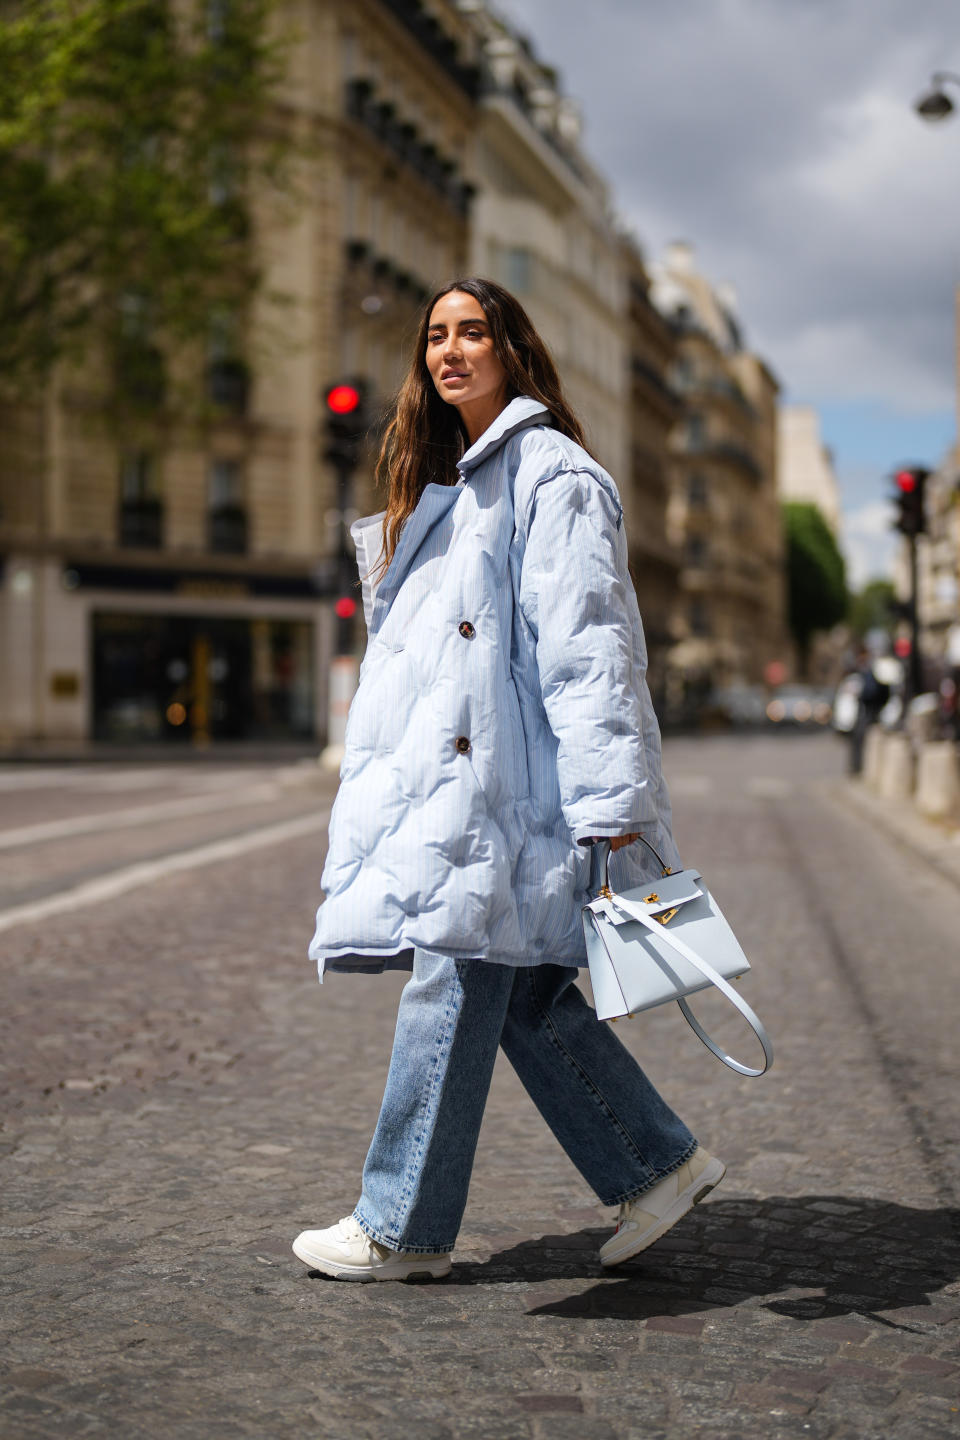 PARIS, FRANCE - MAY 05: Tamara Kalinic wears a pale blue long quilted winter coat from Margiela, blue denim wide-leg jeans pants from Margiela, sneakers shoes with zip-tie from Off-White, a pale blue Hermes Kelly bag, on May 05, 2021 in Paris, France. (Photo by Edward Berthelot/Getty Images)